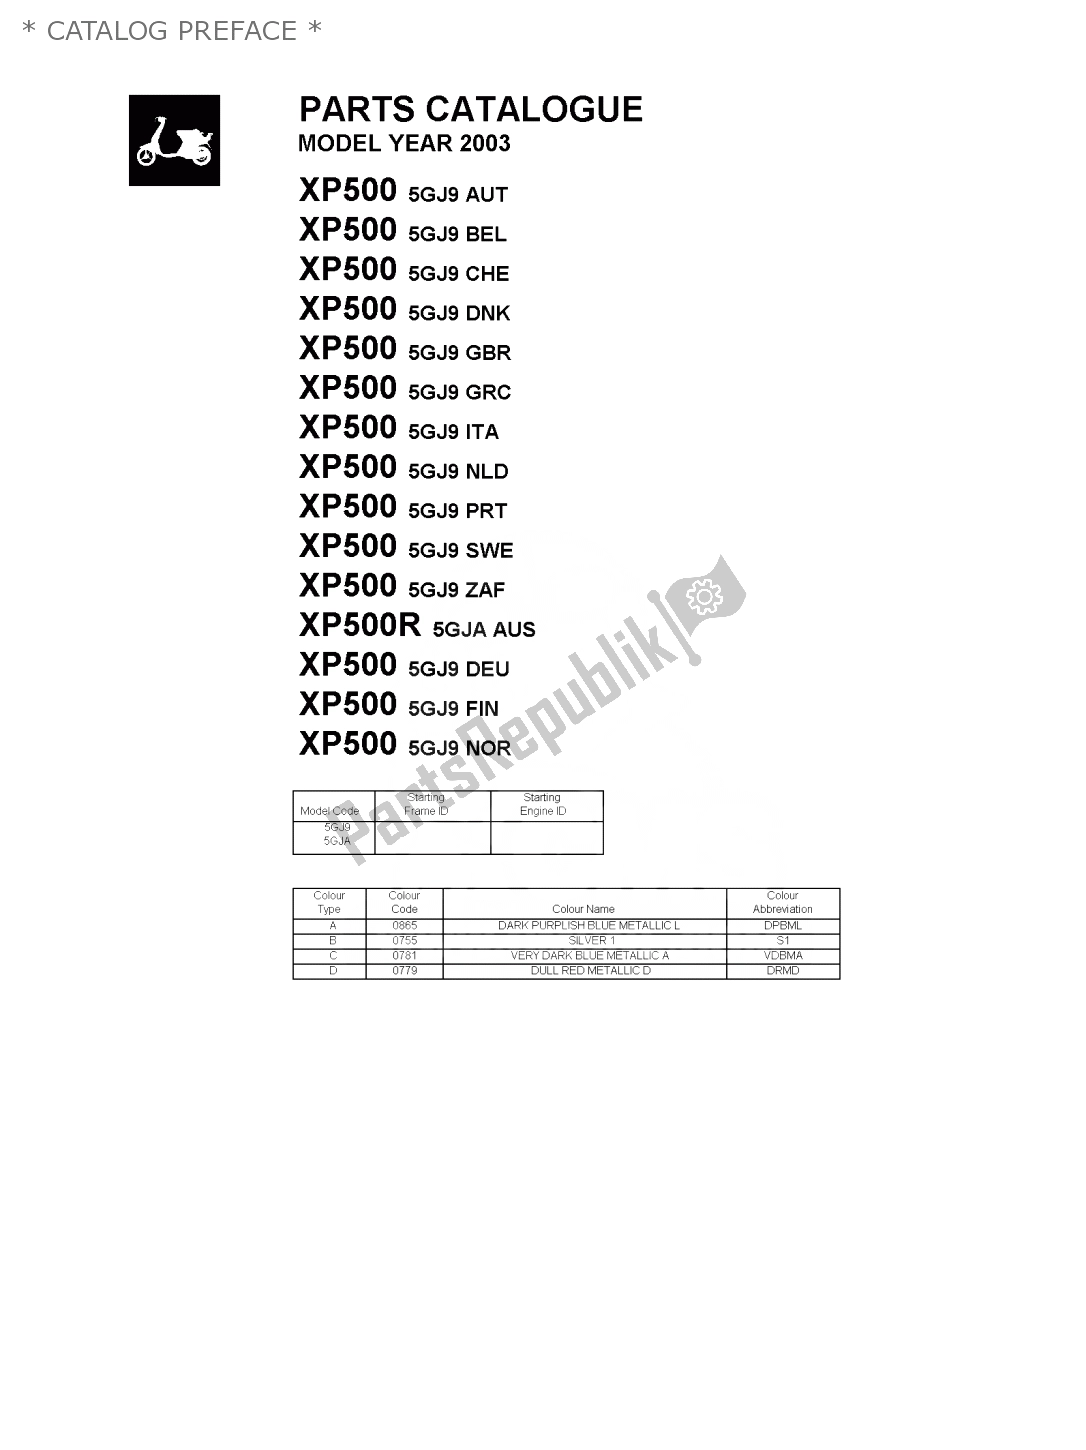 All parts for the * Catalog Preface * of the Yamaha T-max 500 2003